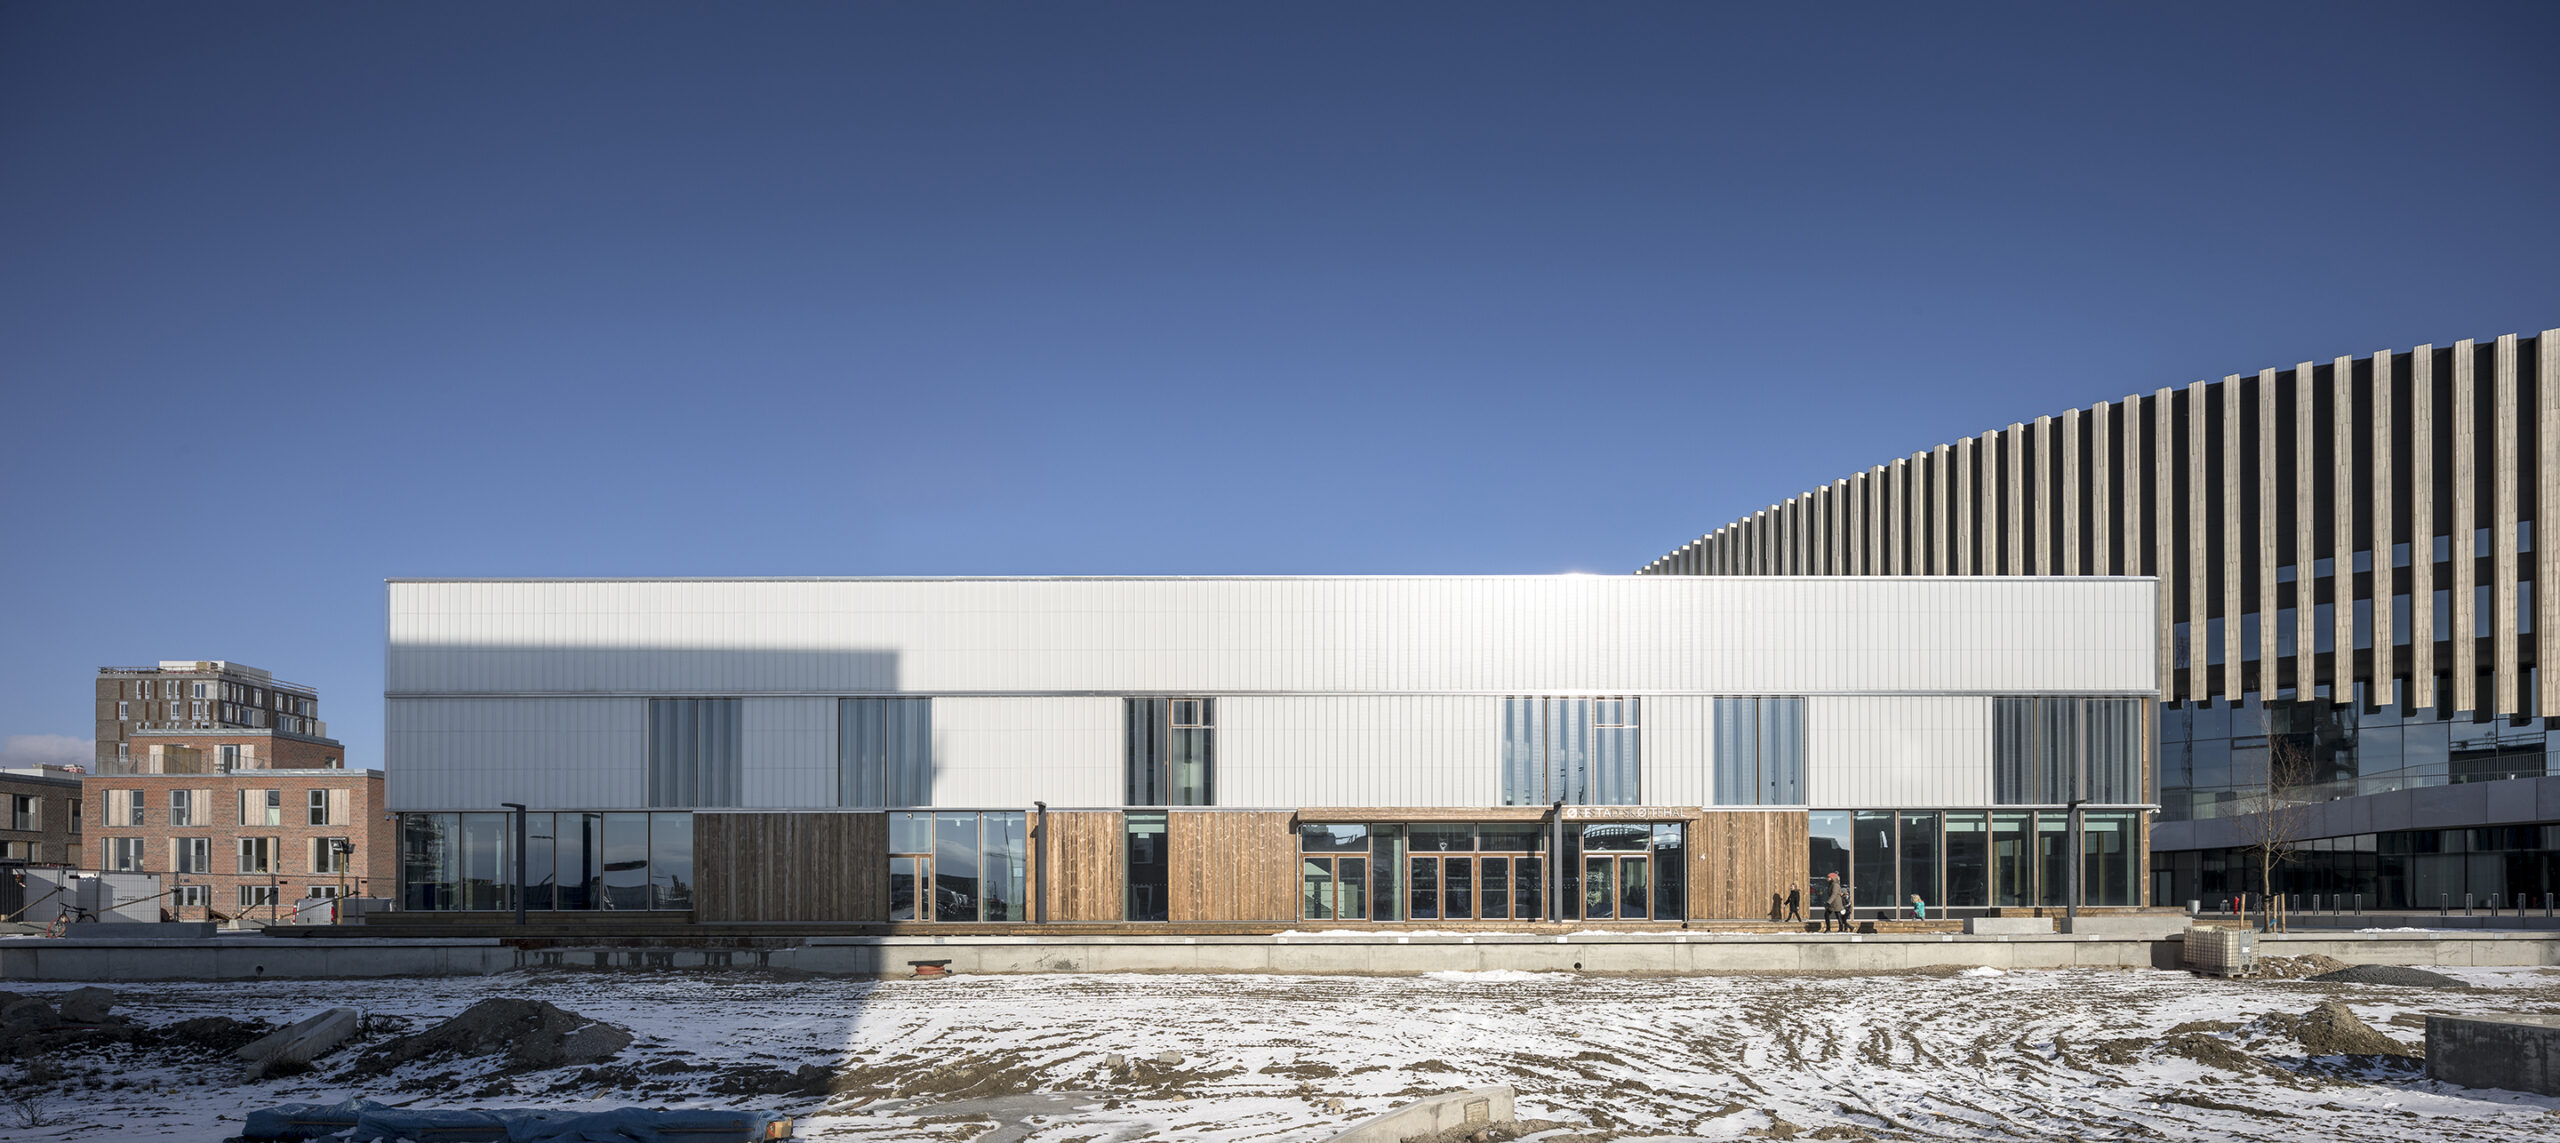 Ørestad Ice Rink's facade with transparent and translucent glass elements, combined with wooden panels.